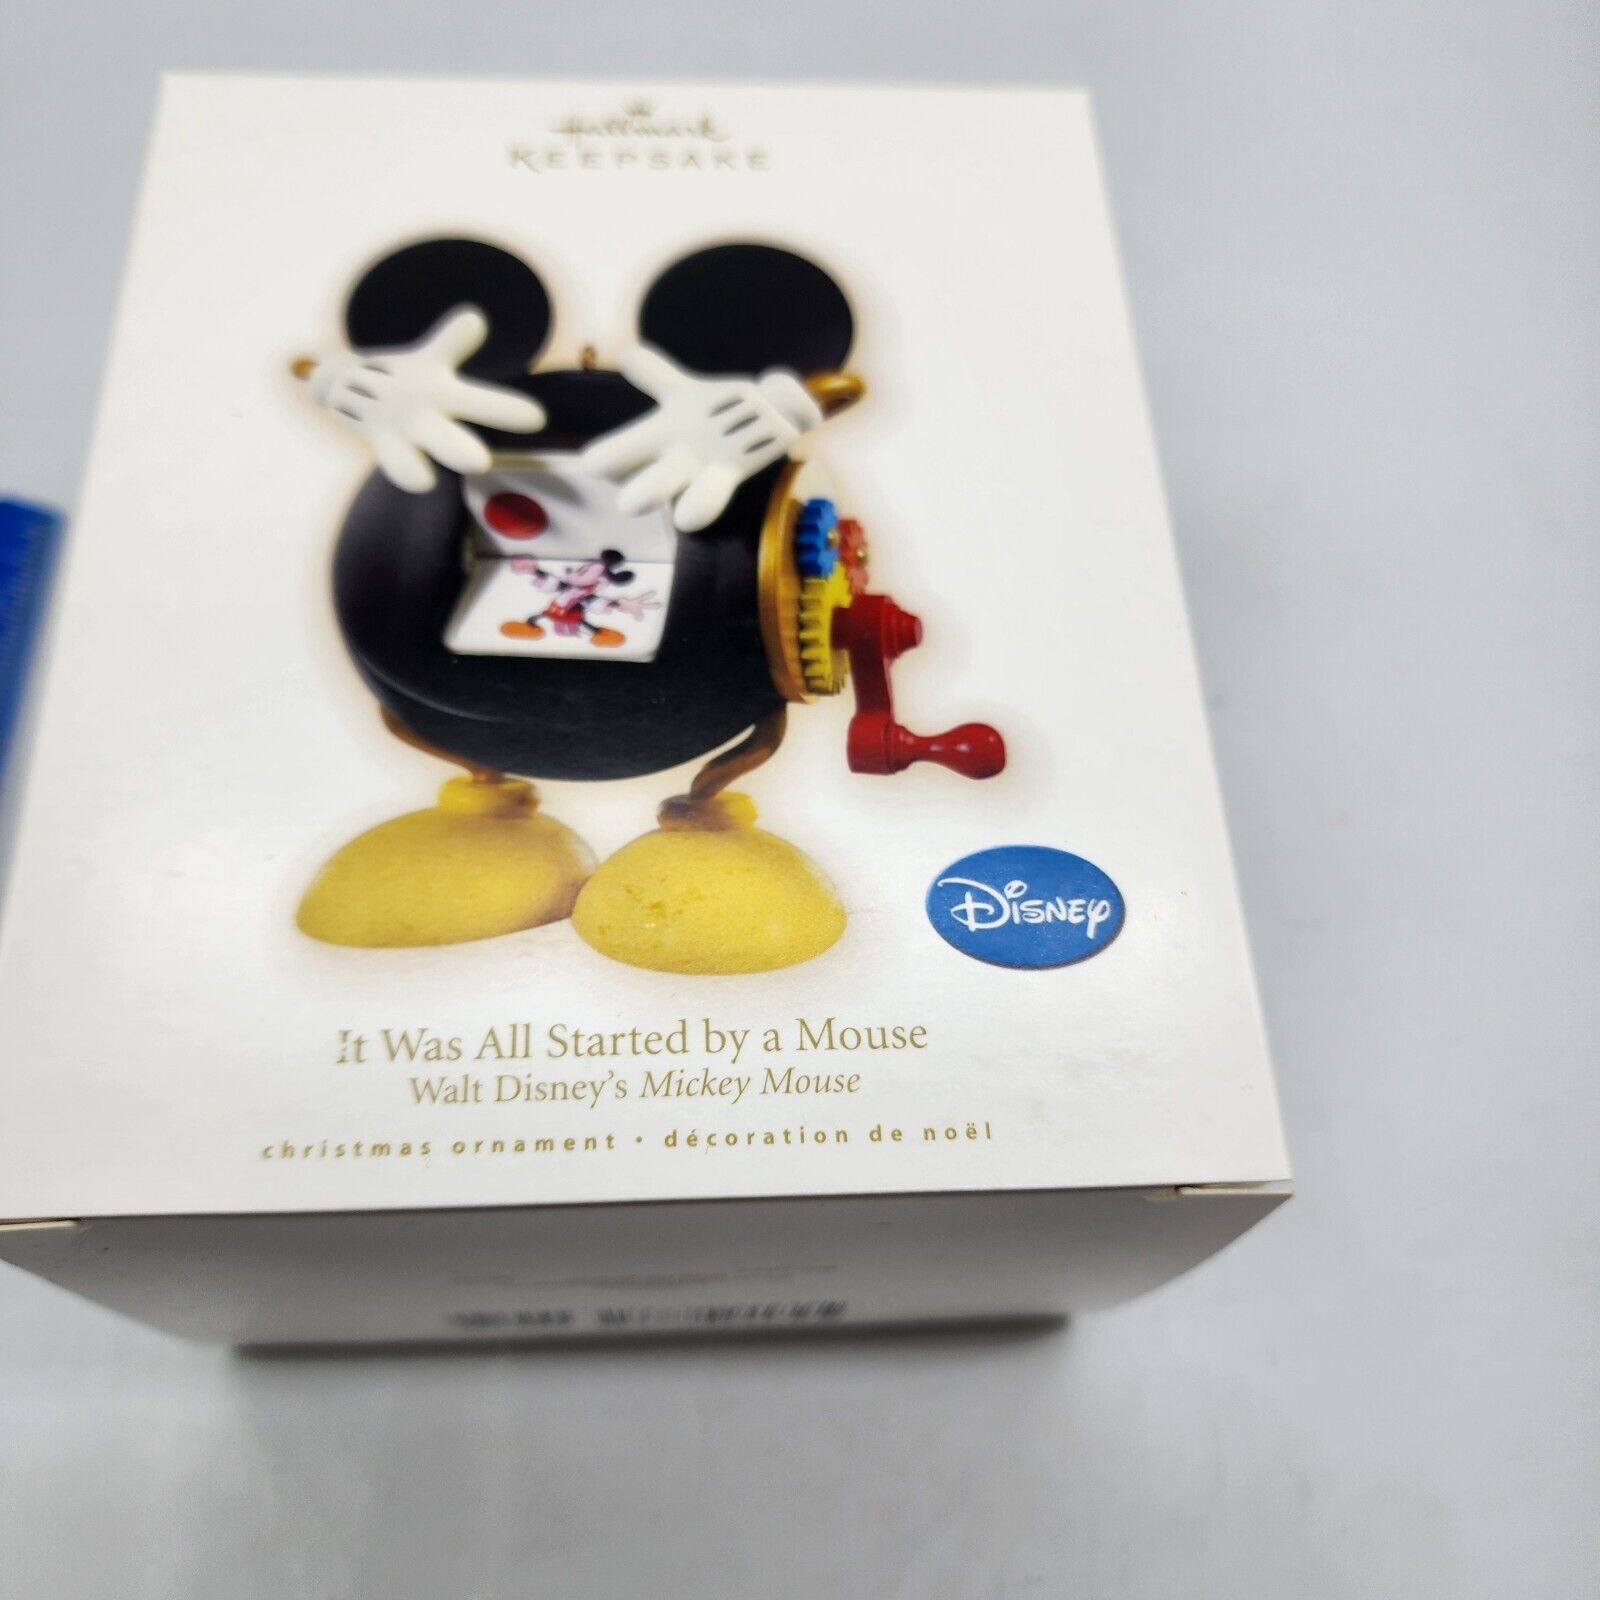 2009 Disney It Was All Started By a Mickey Mouse Hallmark Keepsake Ornament NEW